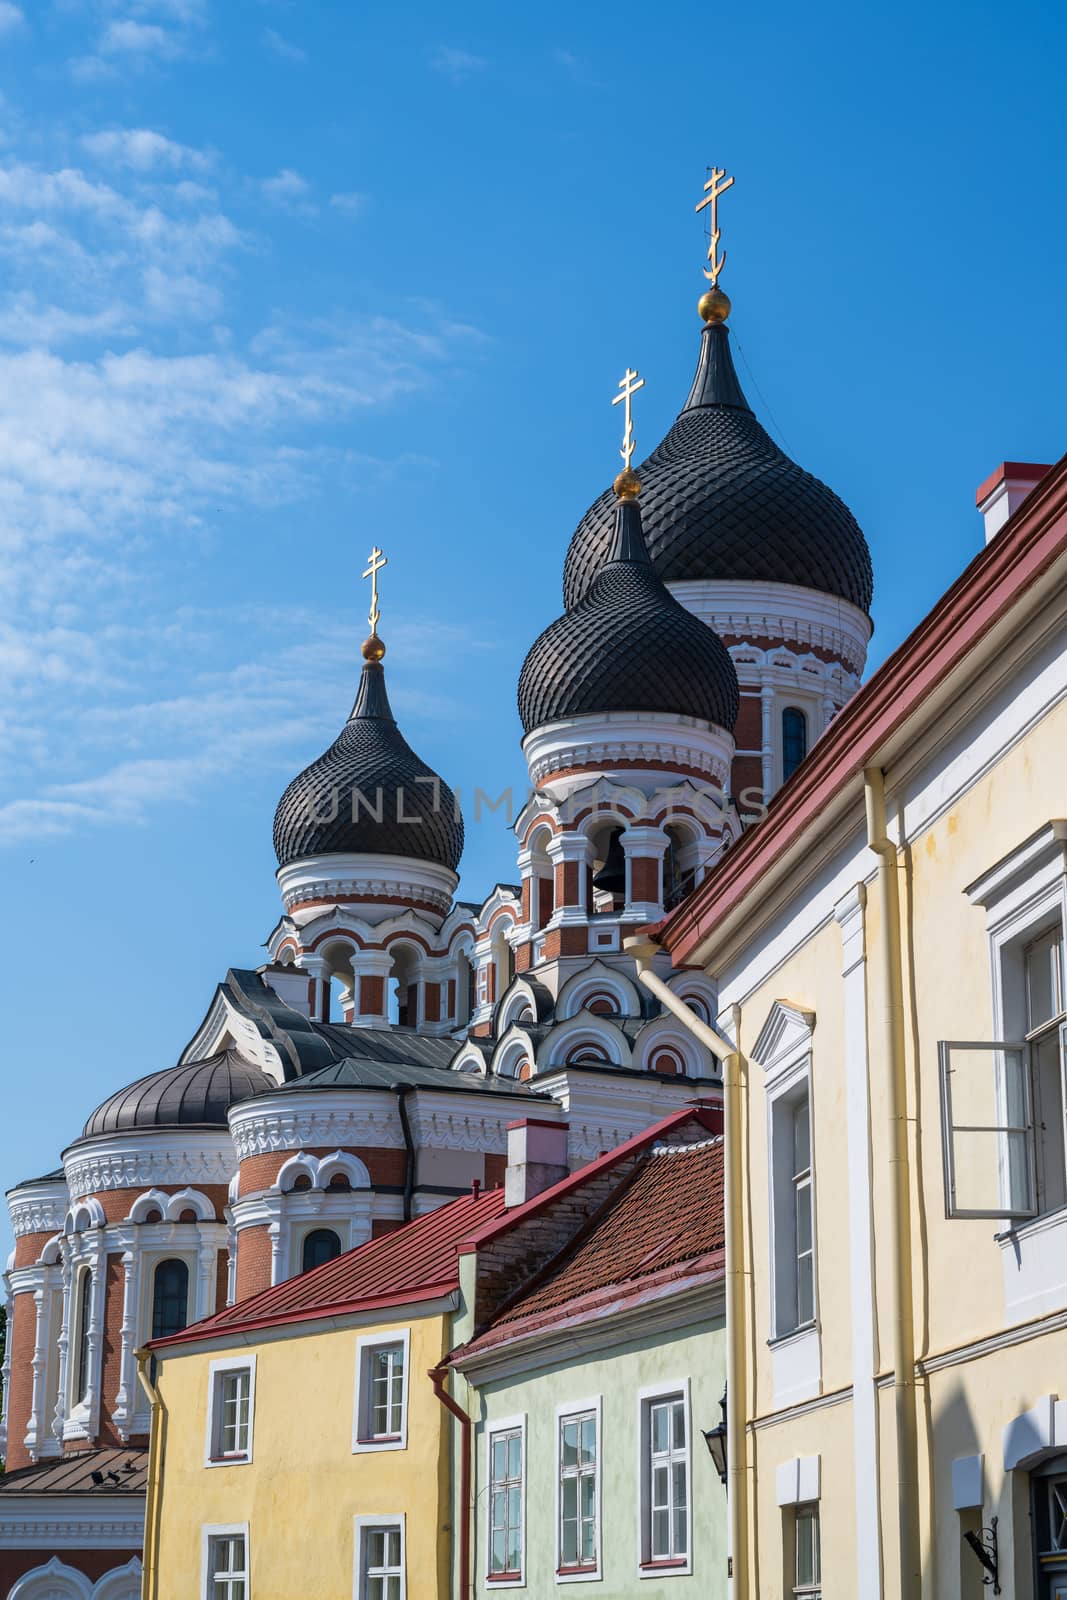 Photo of the Onion Domes of Alexander Nevsky Cathedral in Tallin Estonia.